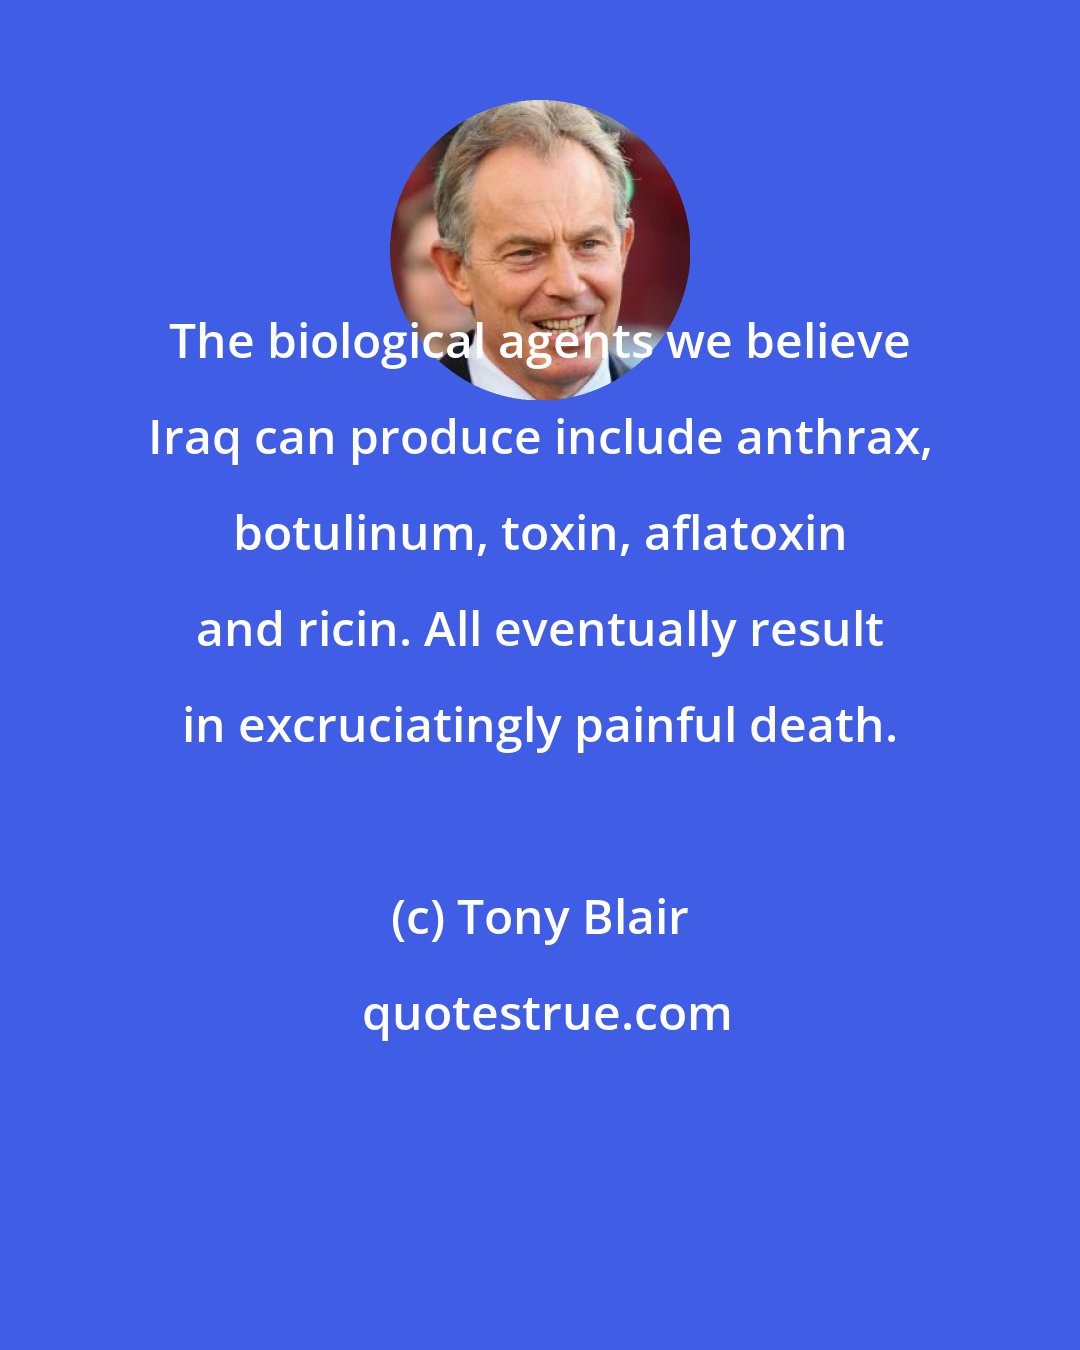 Tony Blair: The biological agents we believe Iraq can produce include anthrax, botulinum, toxin, aflatoxin and ricin. All eventually result in excruciatingly painful death.